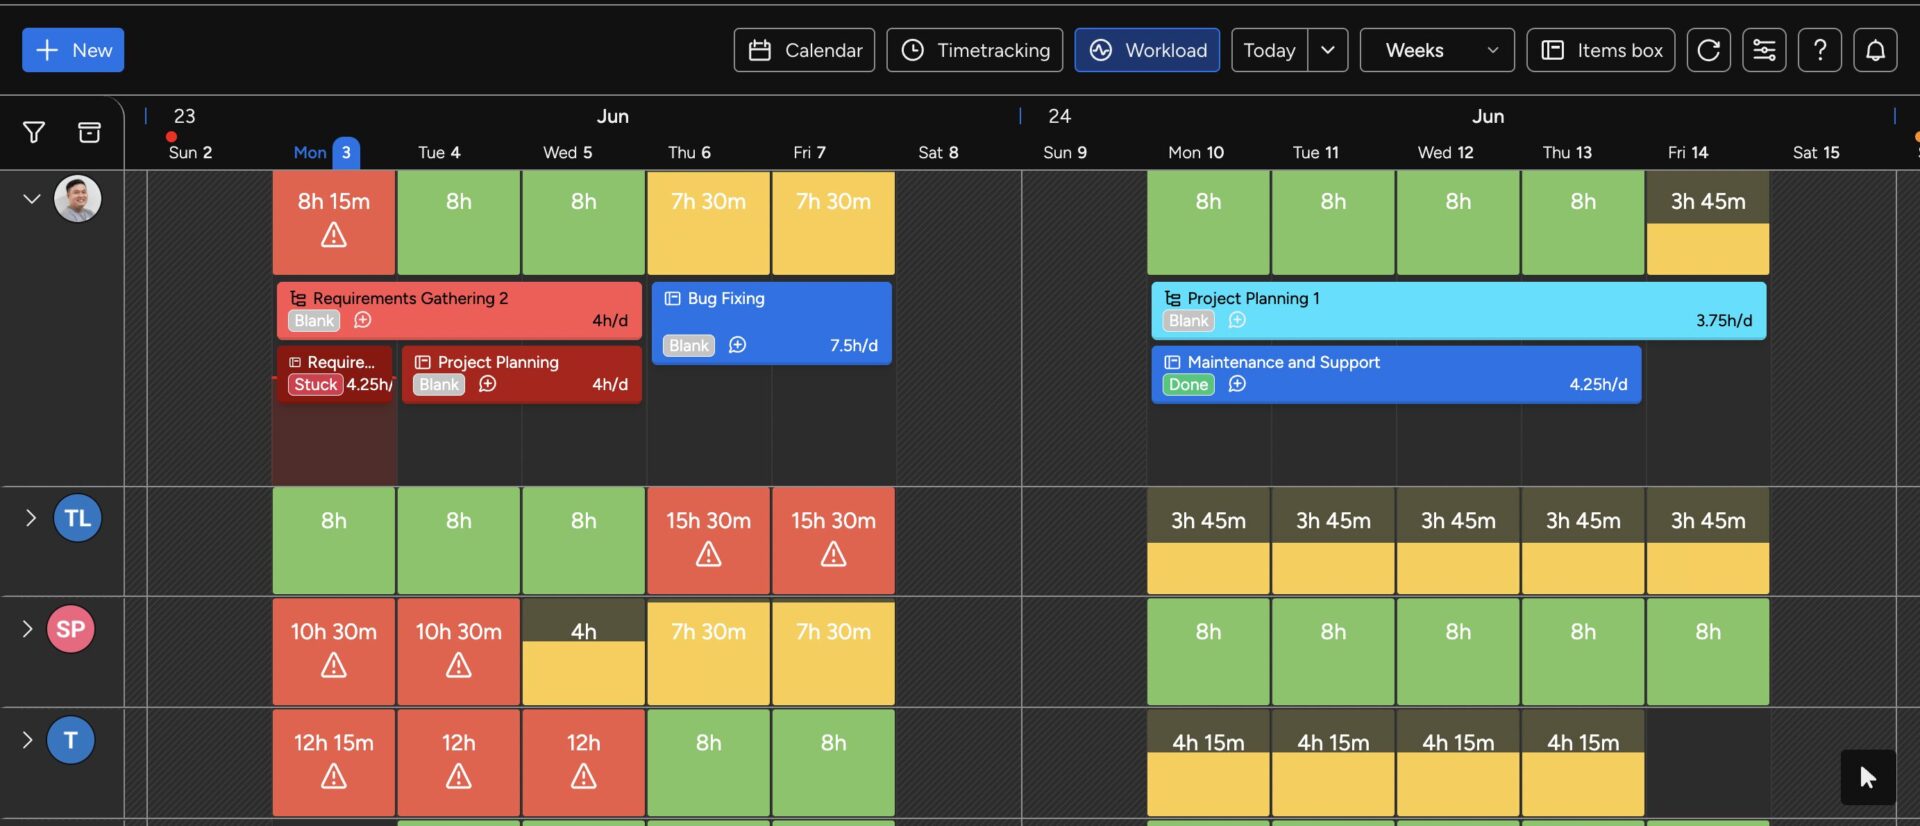 Key Features of TeamBoard for Workload Management